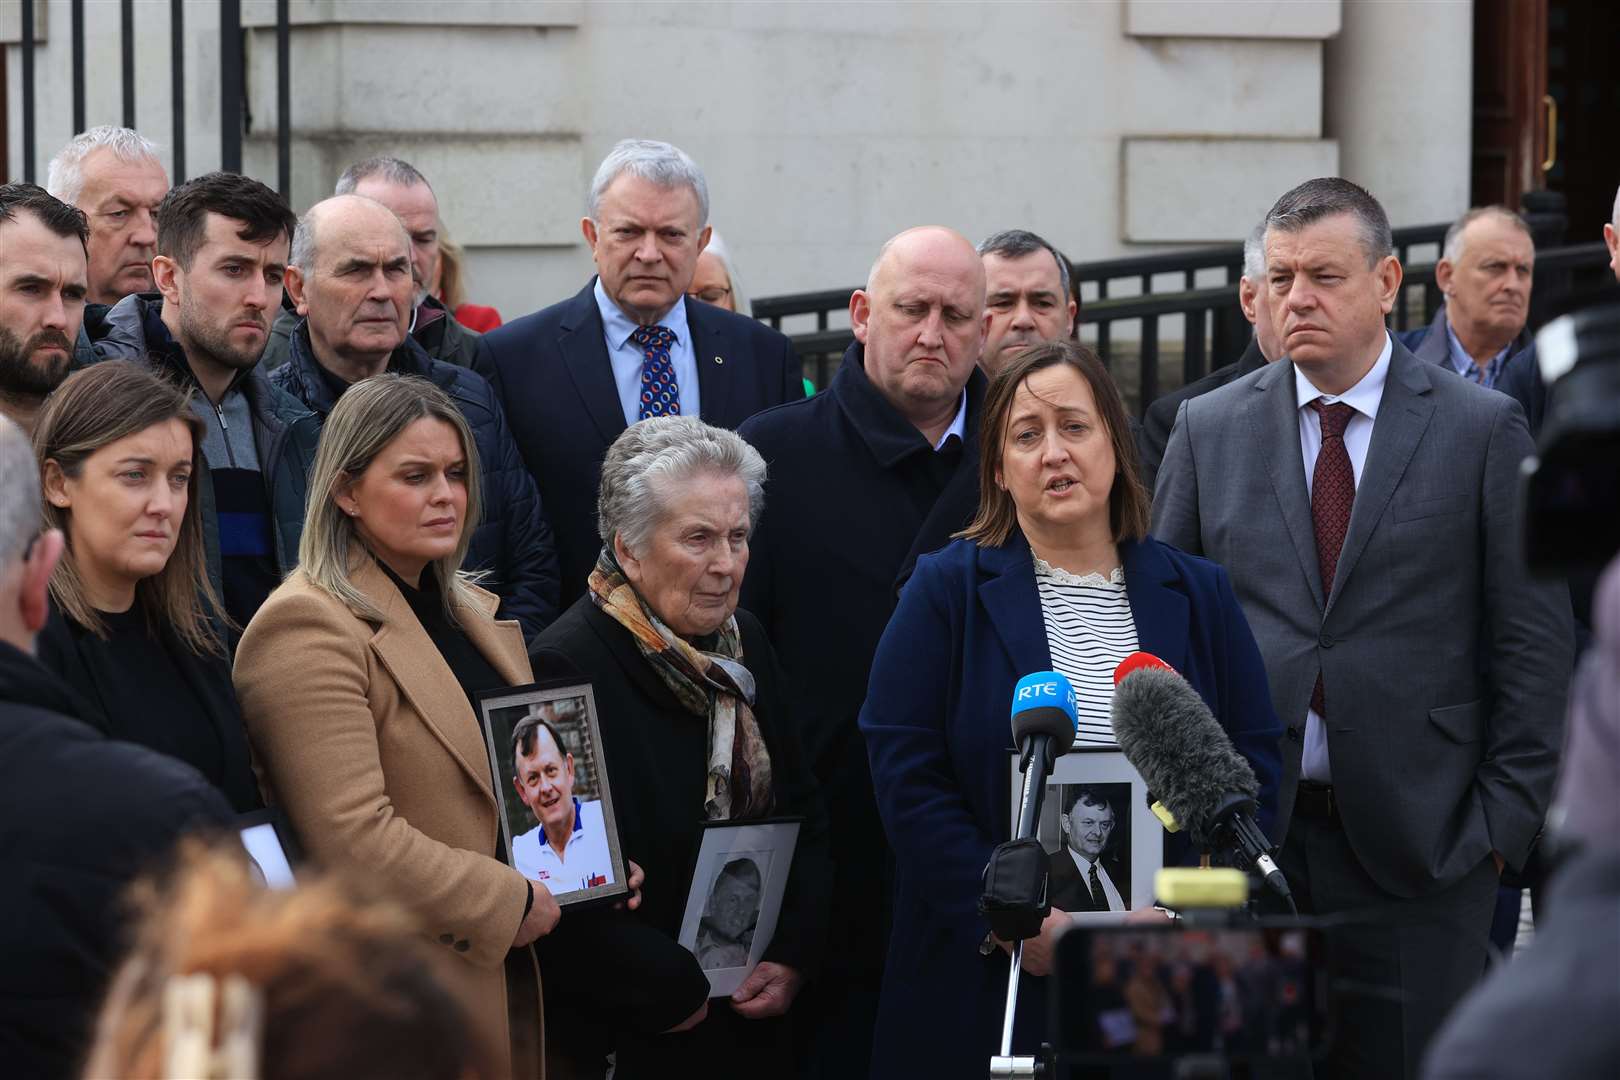 Siobhan Brown speaks to the media after the coroner’s ruling (Liam McBurney/PA).